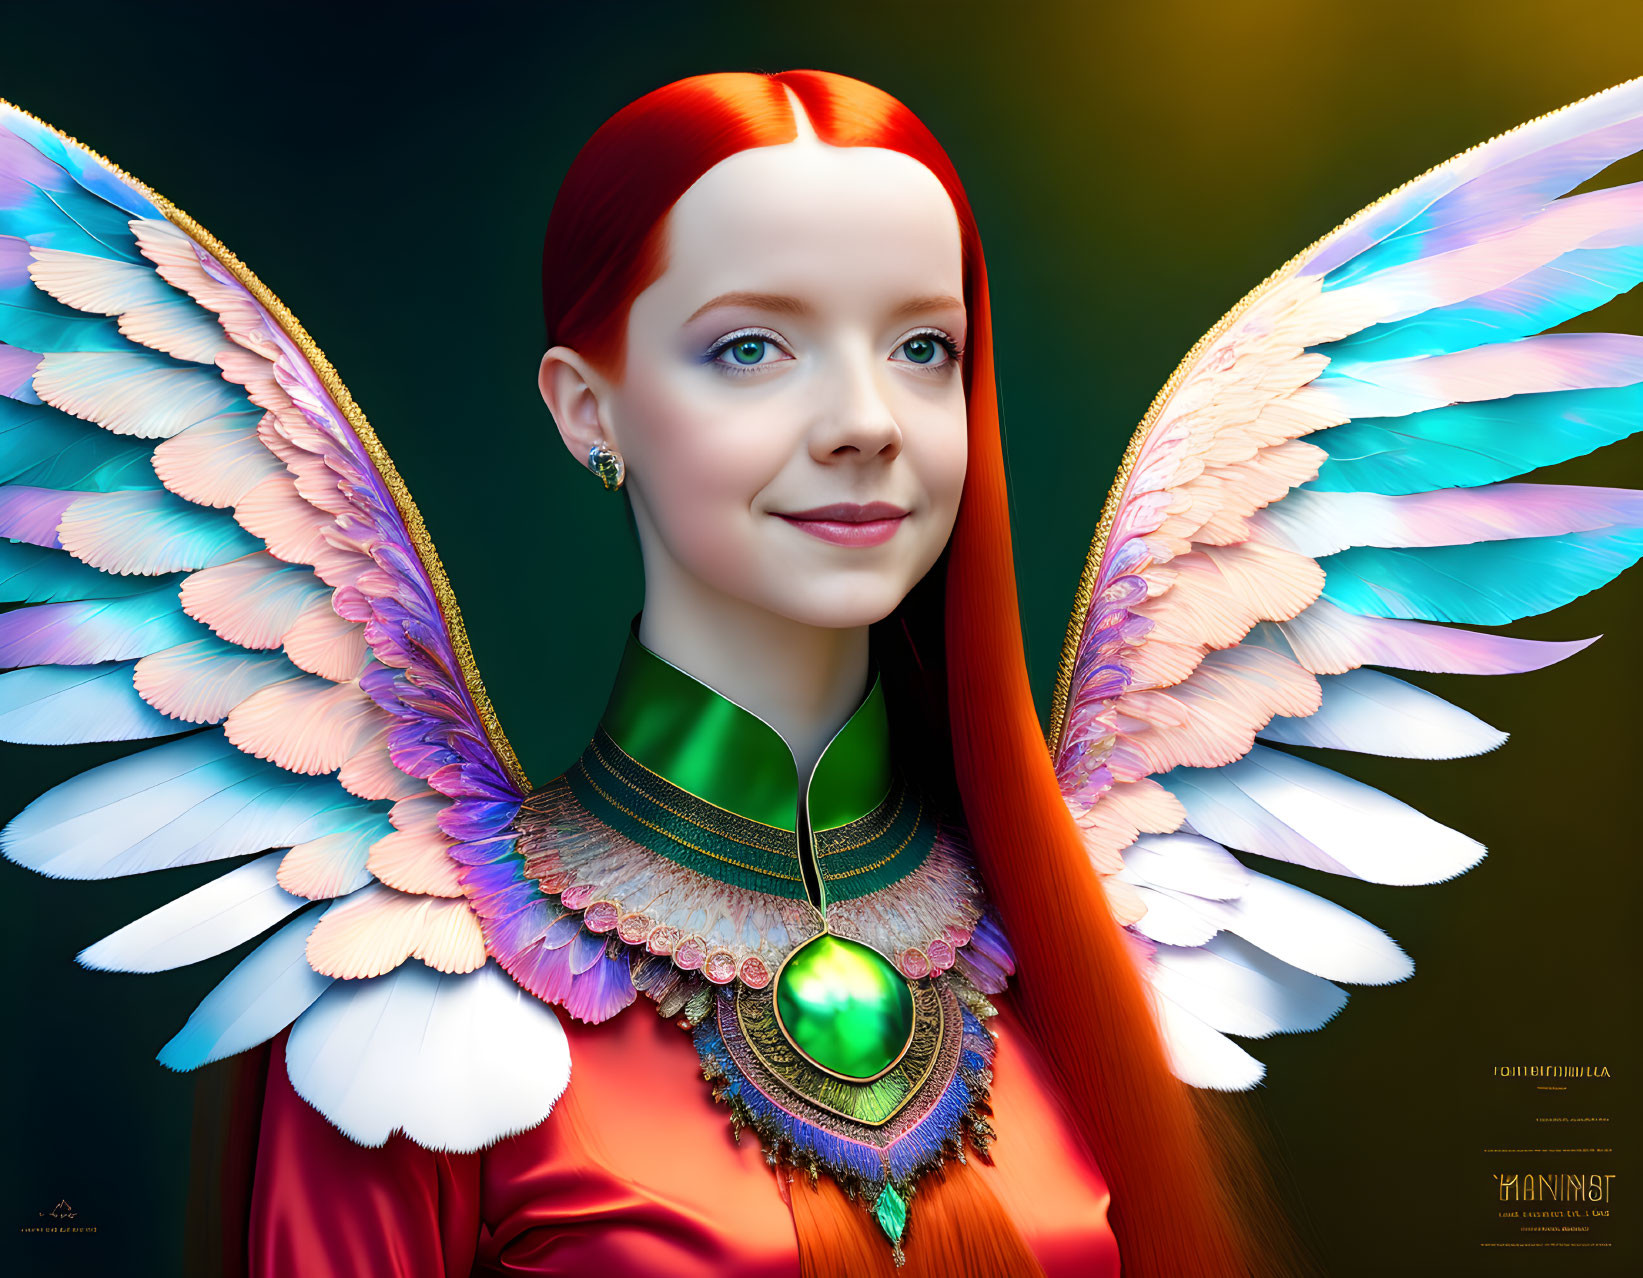 Vibrant red-haired girl with multicolored angel wings and green gem necklace